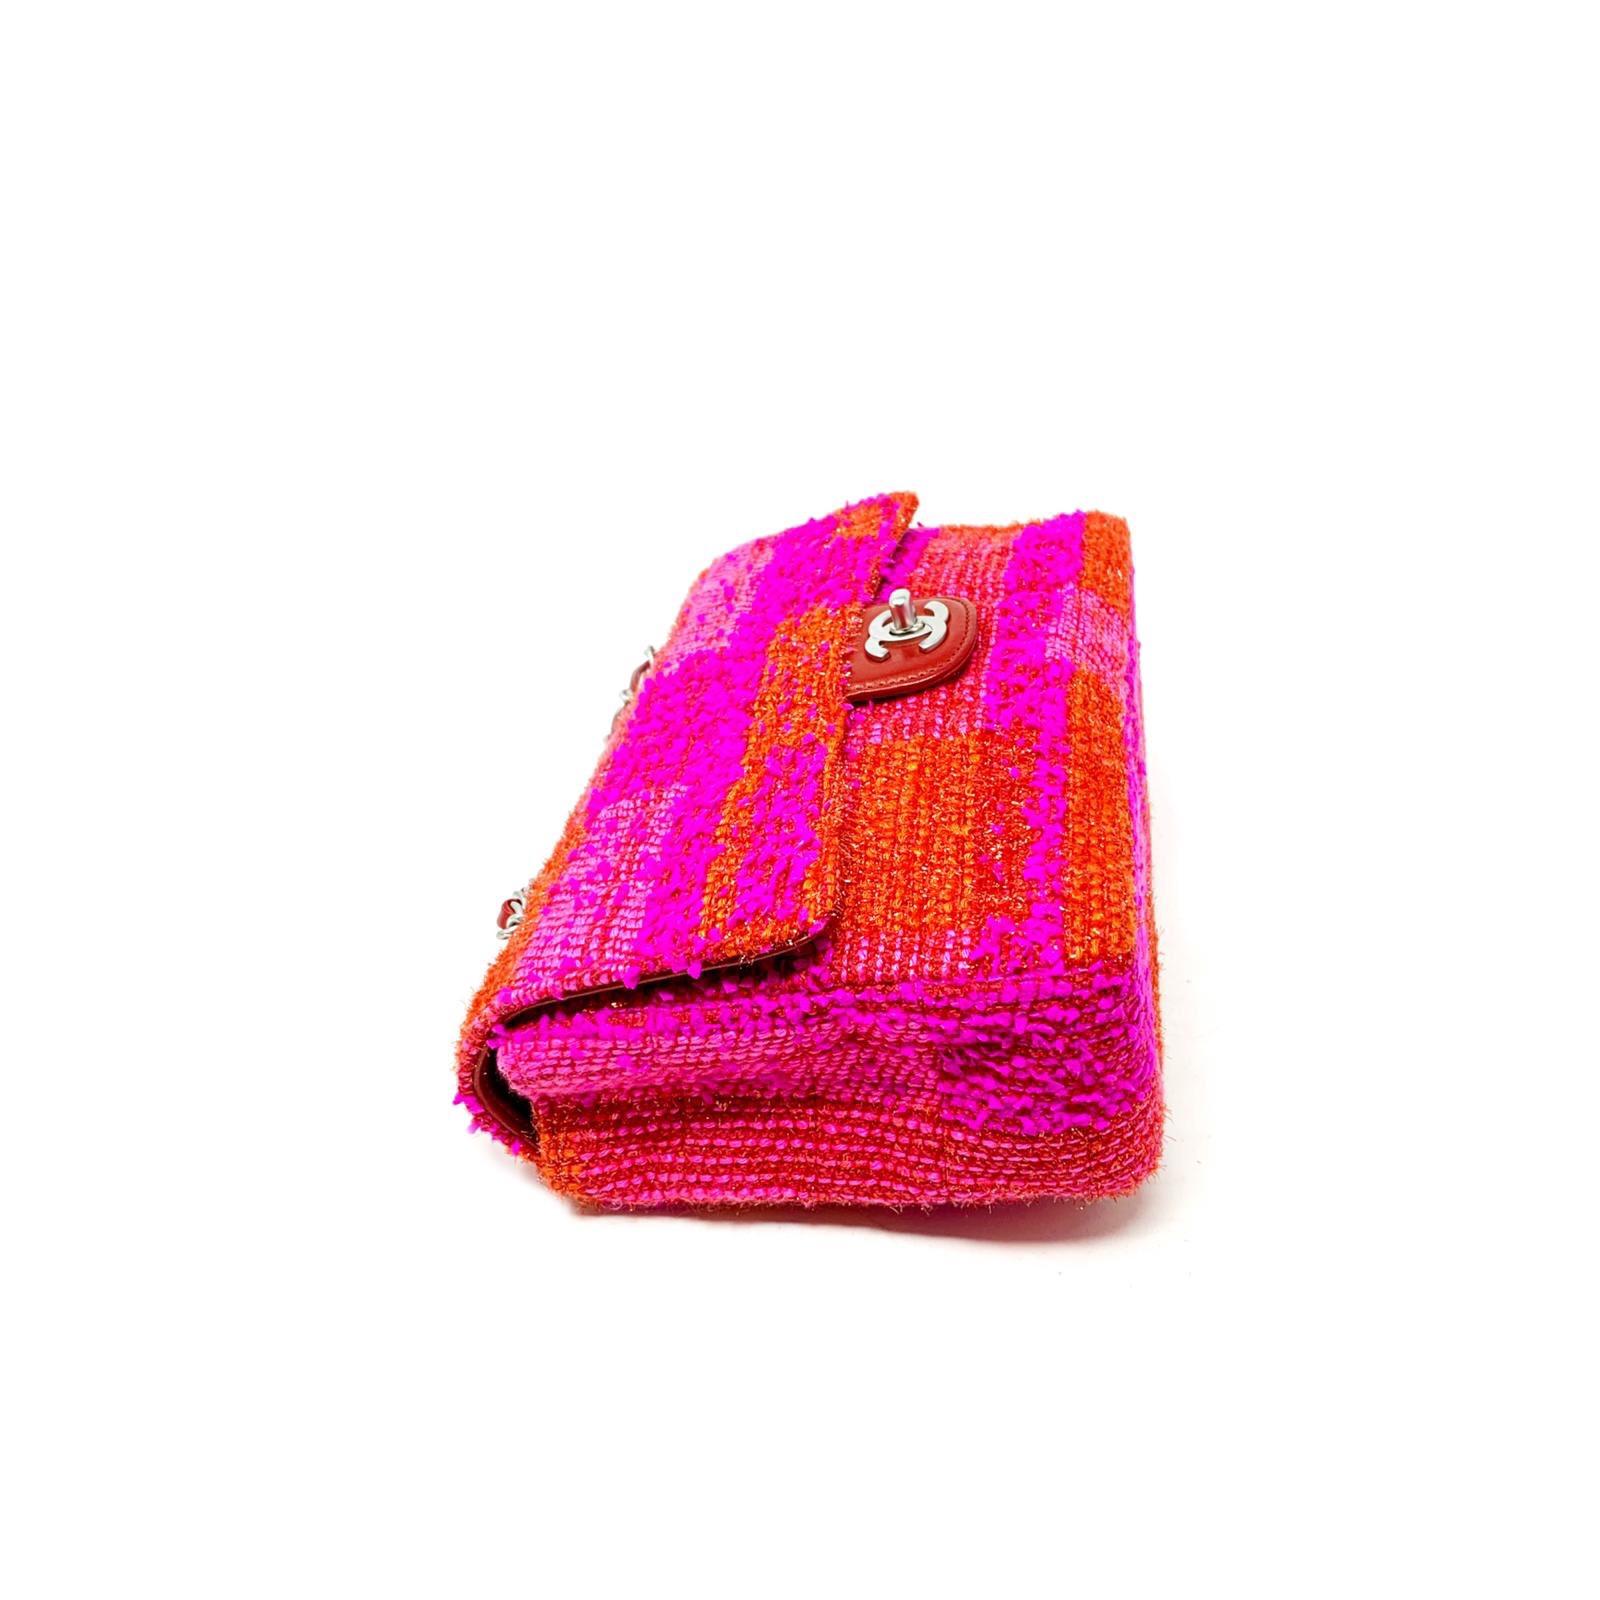 Classic Chanel bag 26 cm Tweed multicolor Fucsia / red
 Excellent condition, inside in red leather Year of production 2002 Card and dust-bag included.
